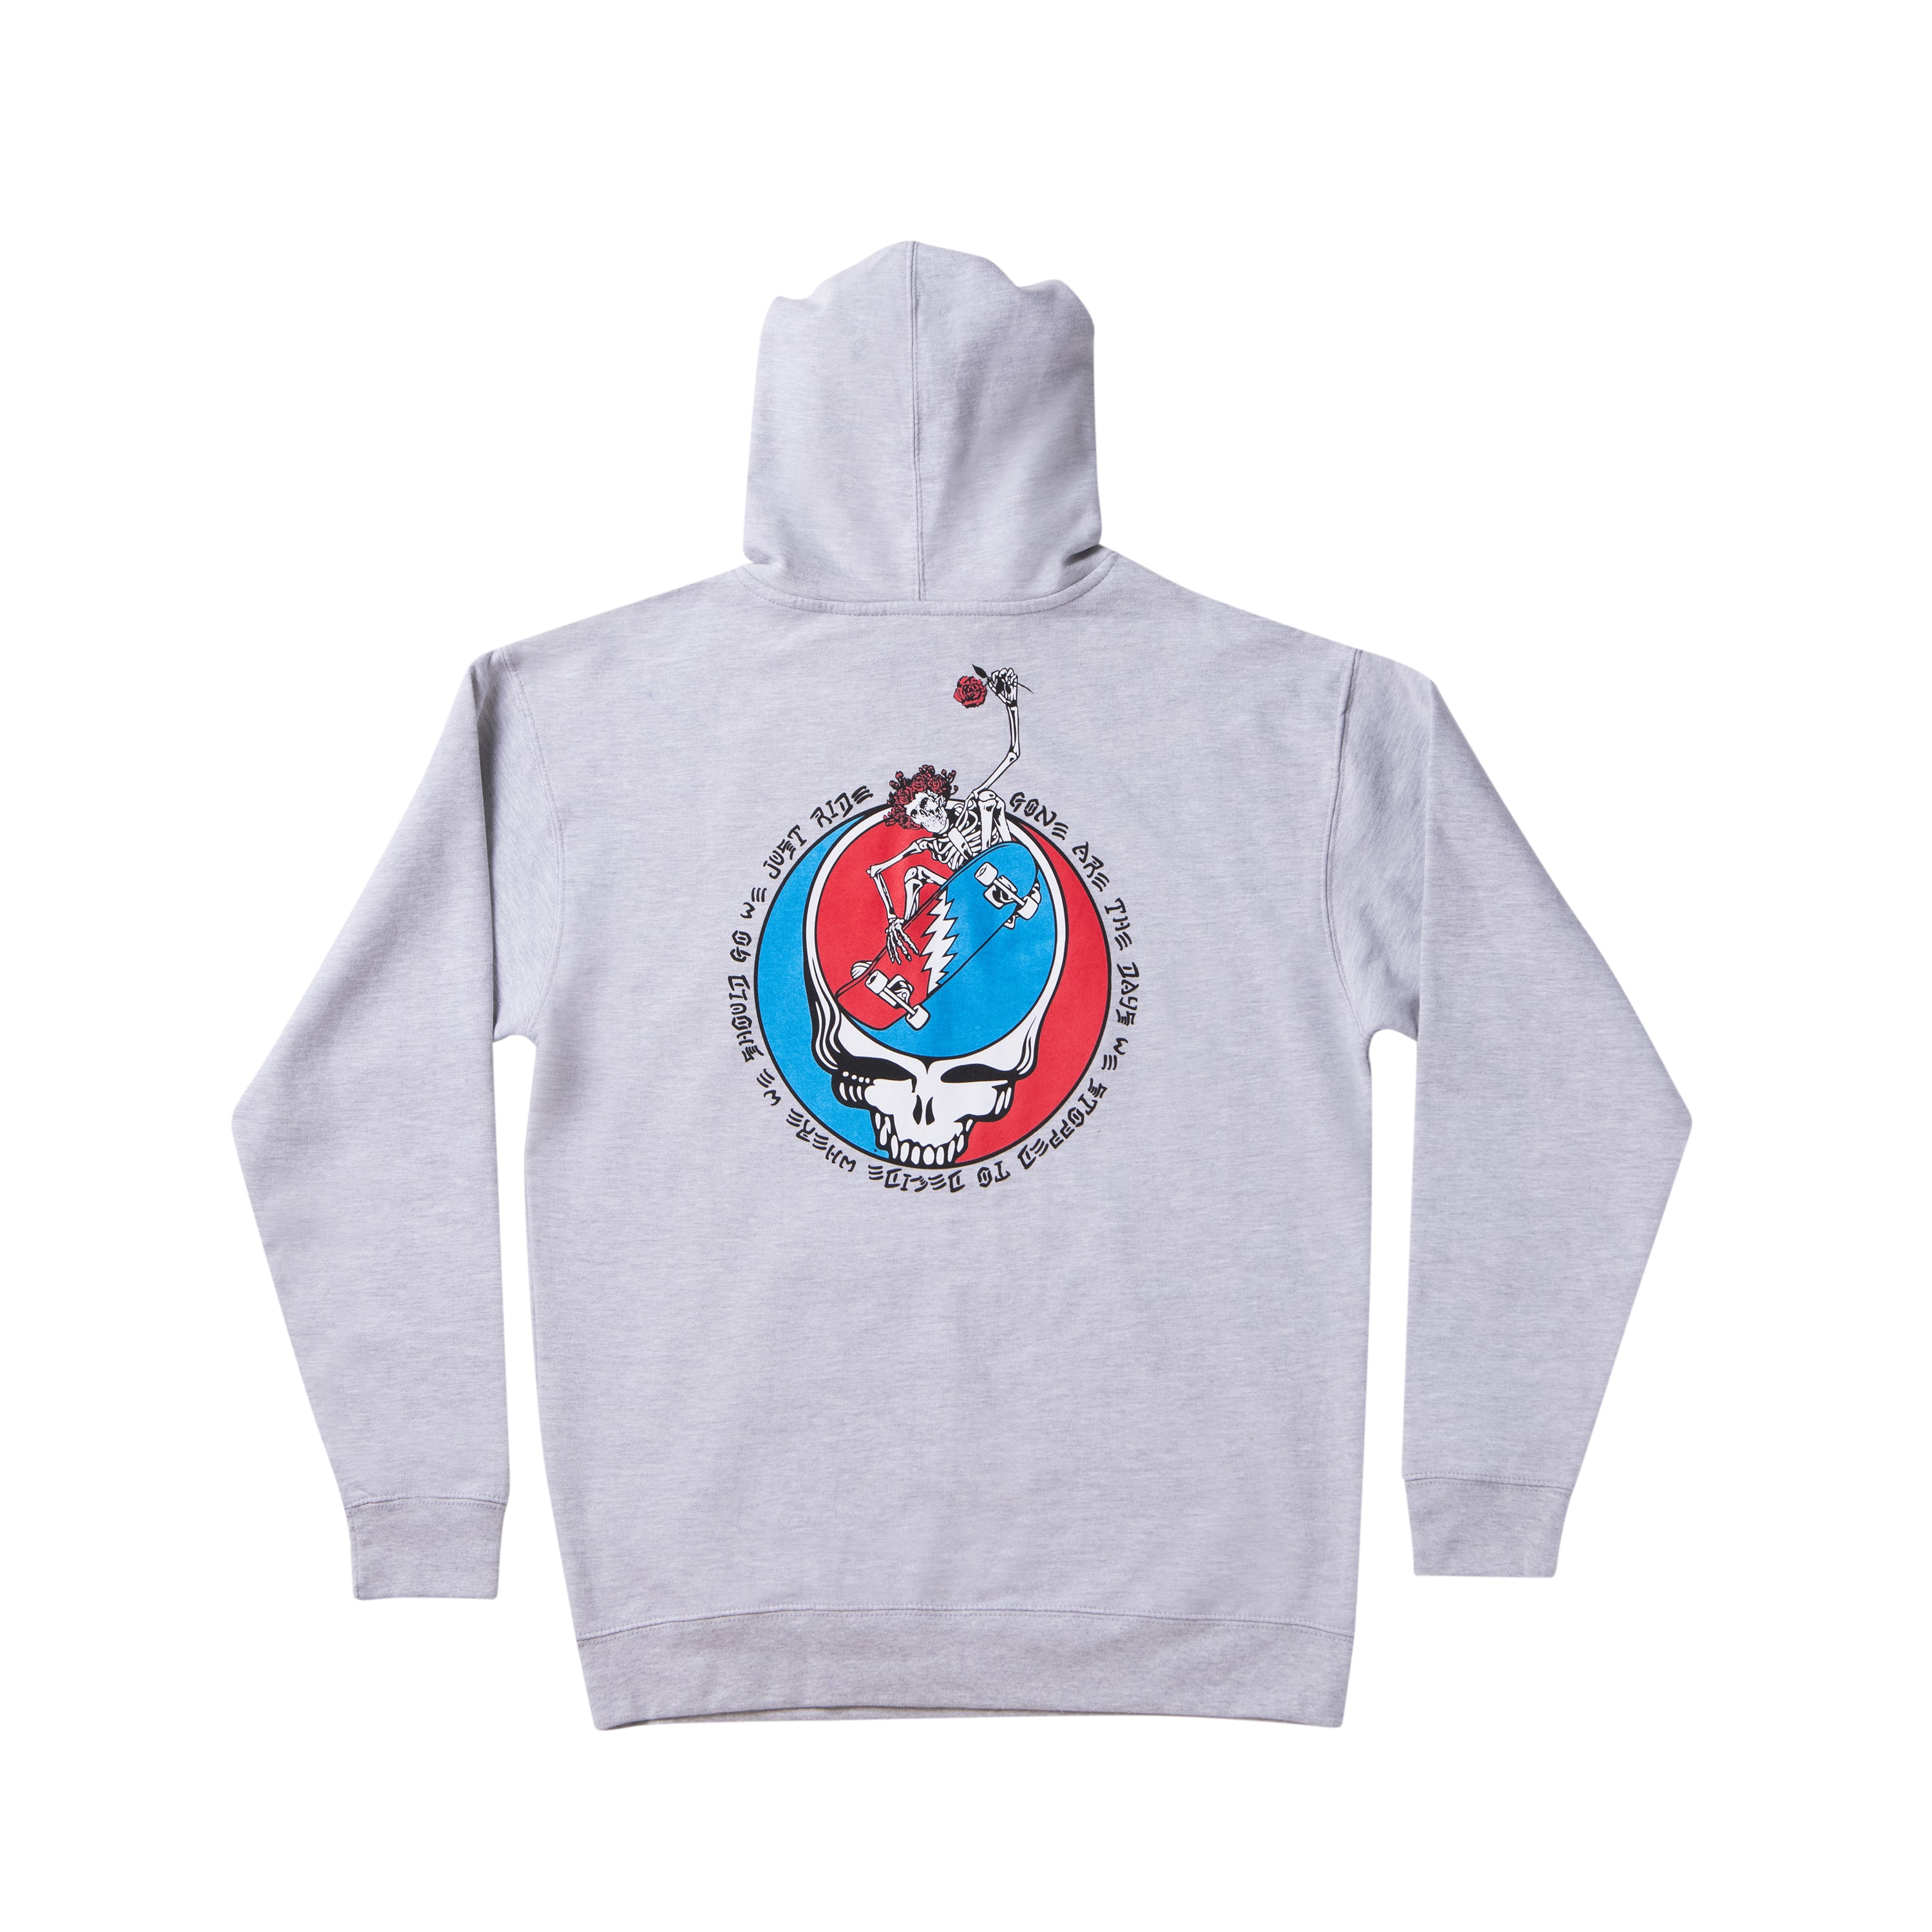 Grateful Dead x TGR “Gone Are the Days...We Just Ride” Hoodie by Brett Whitley